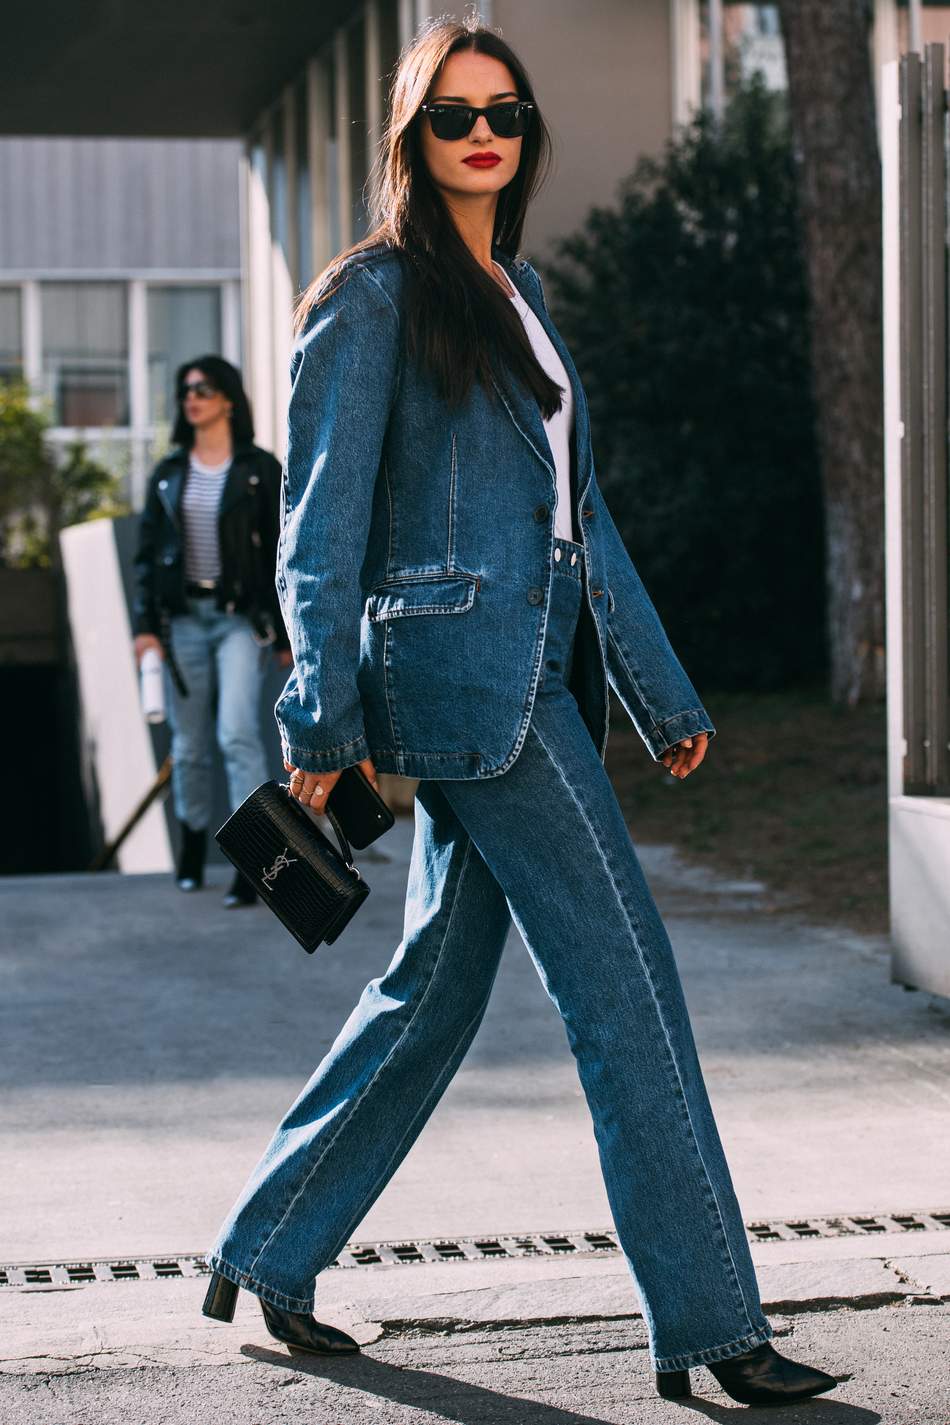 The New Denim Trends That are Gong to be BIG - Blank Itinerary